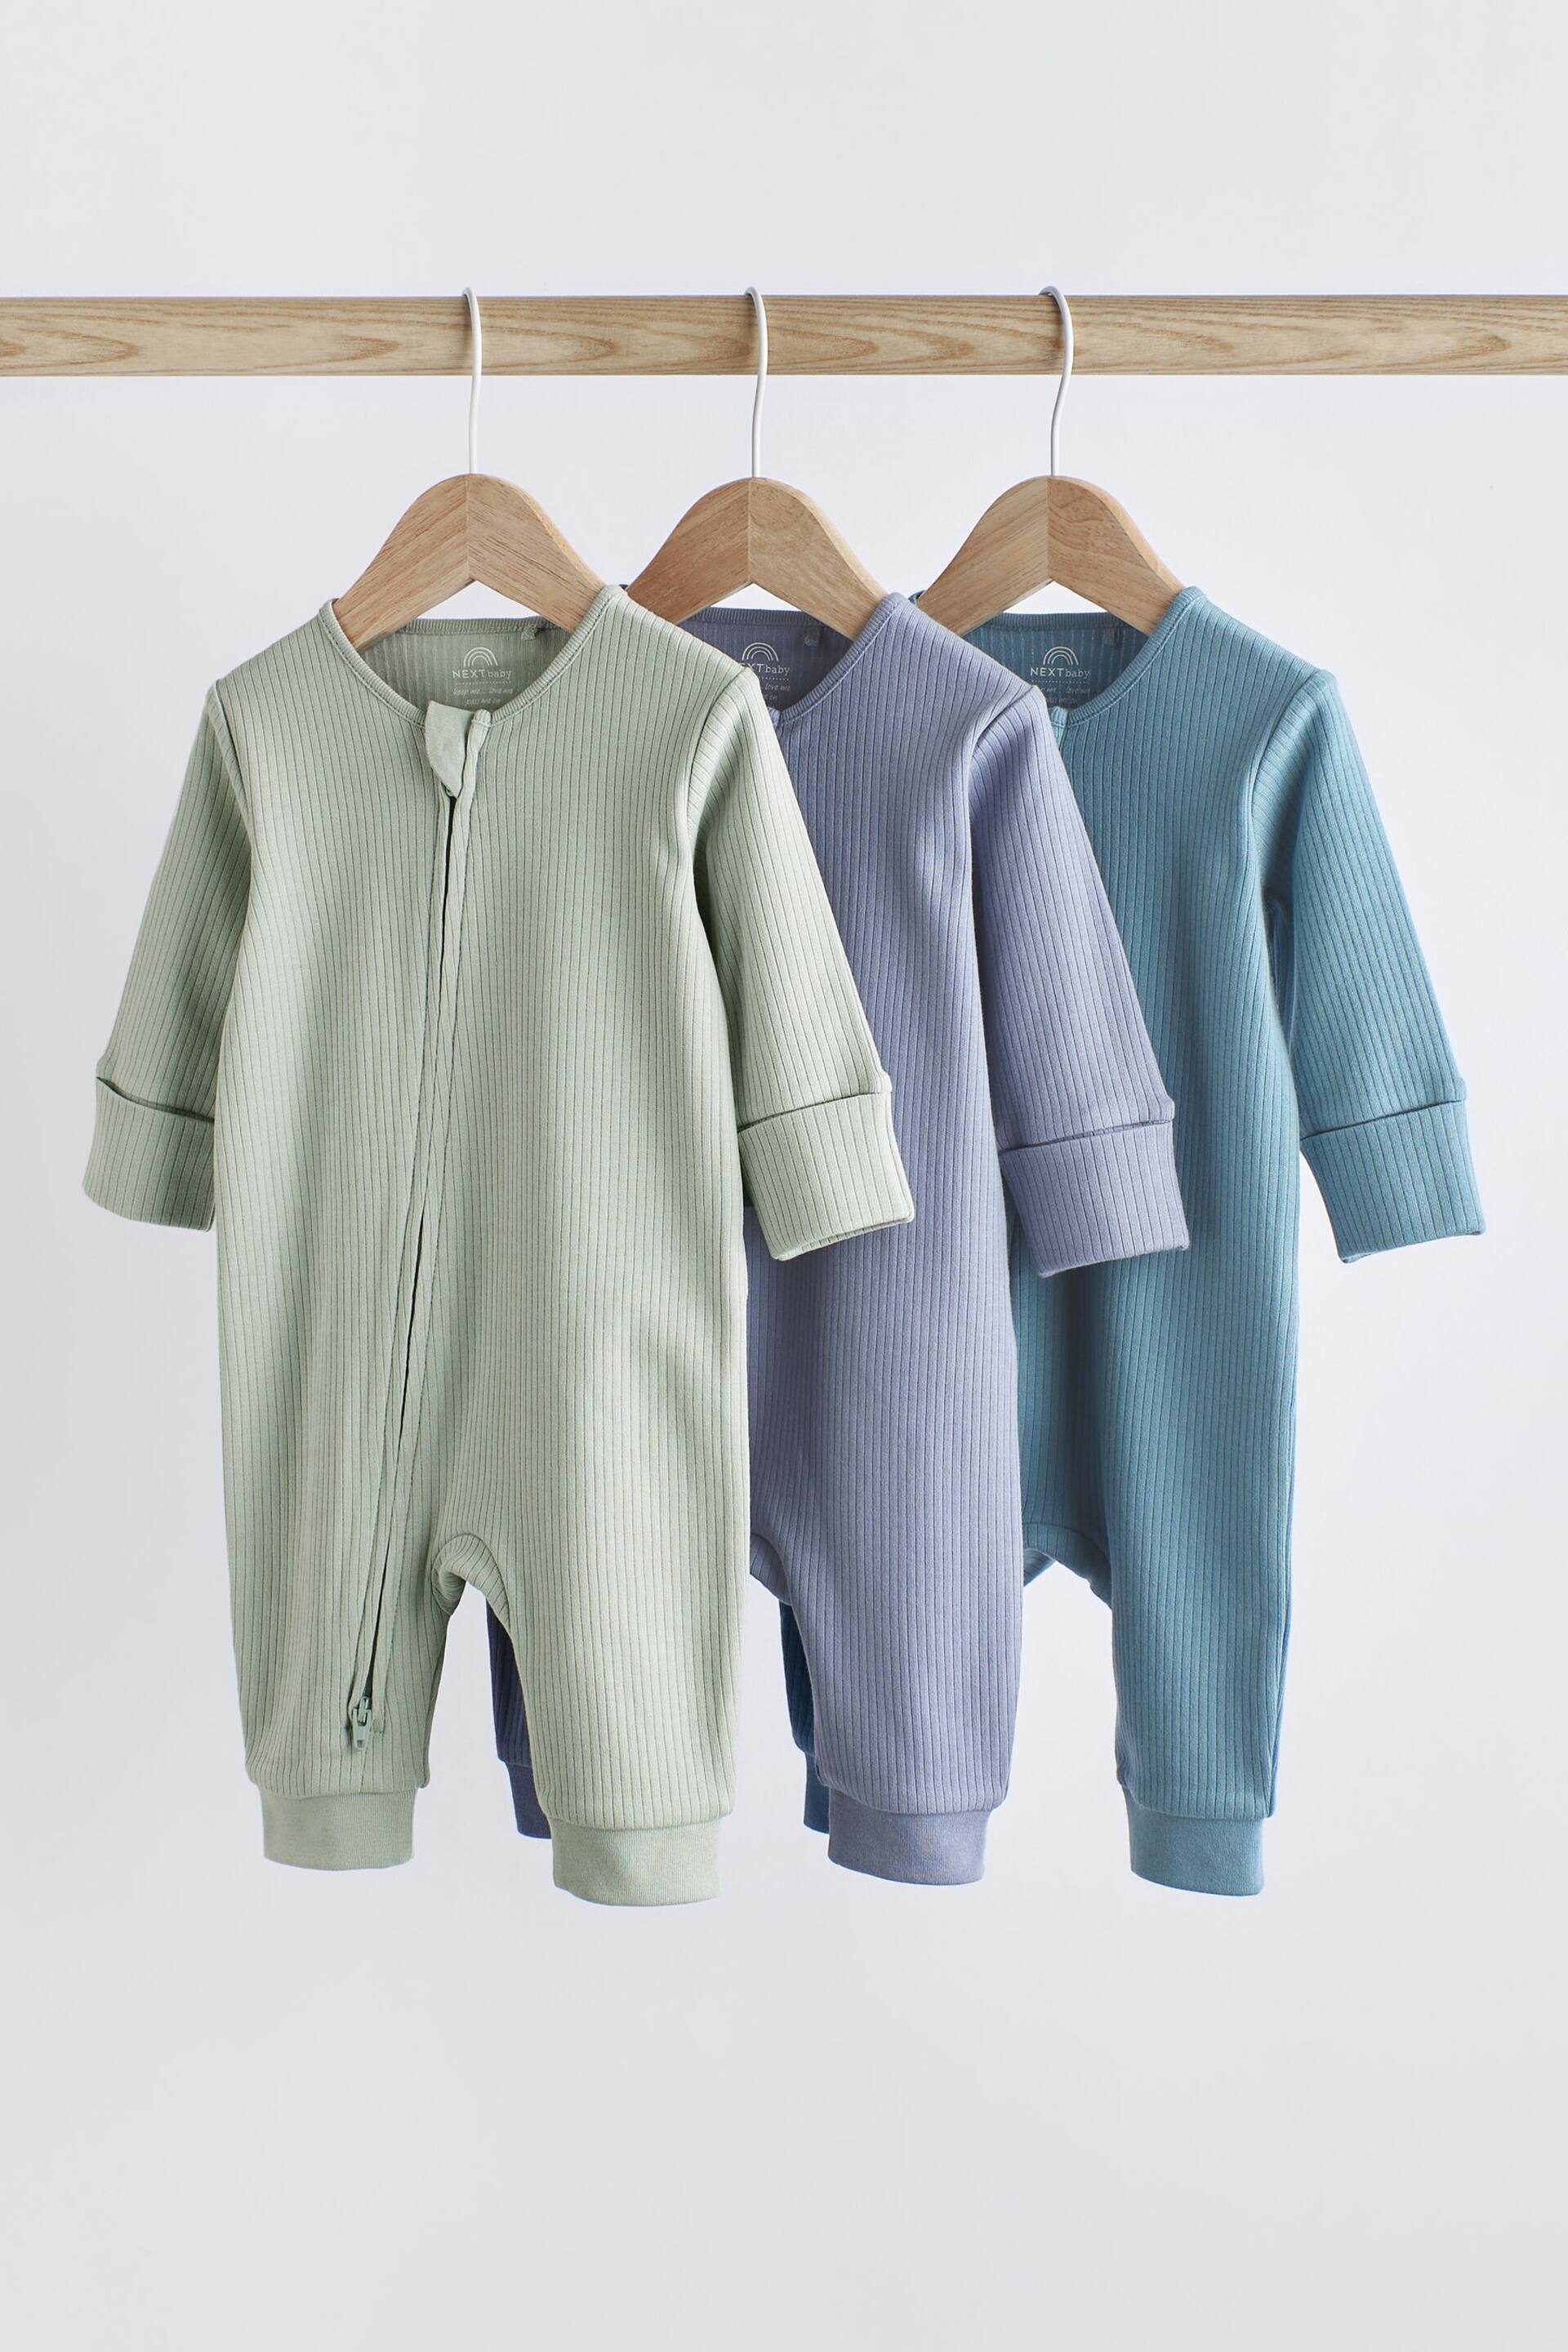 Blue / Grey Baby Plain Footless Zipped Sleepsuits 3 Pack (0-3yrs) - Image 1 of 8